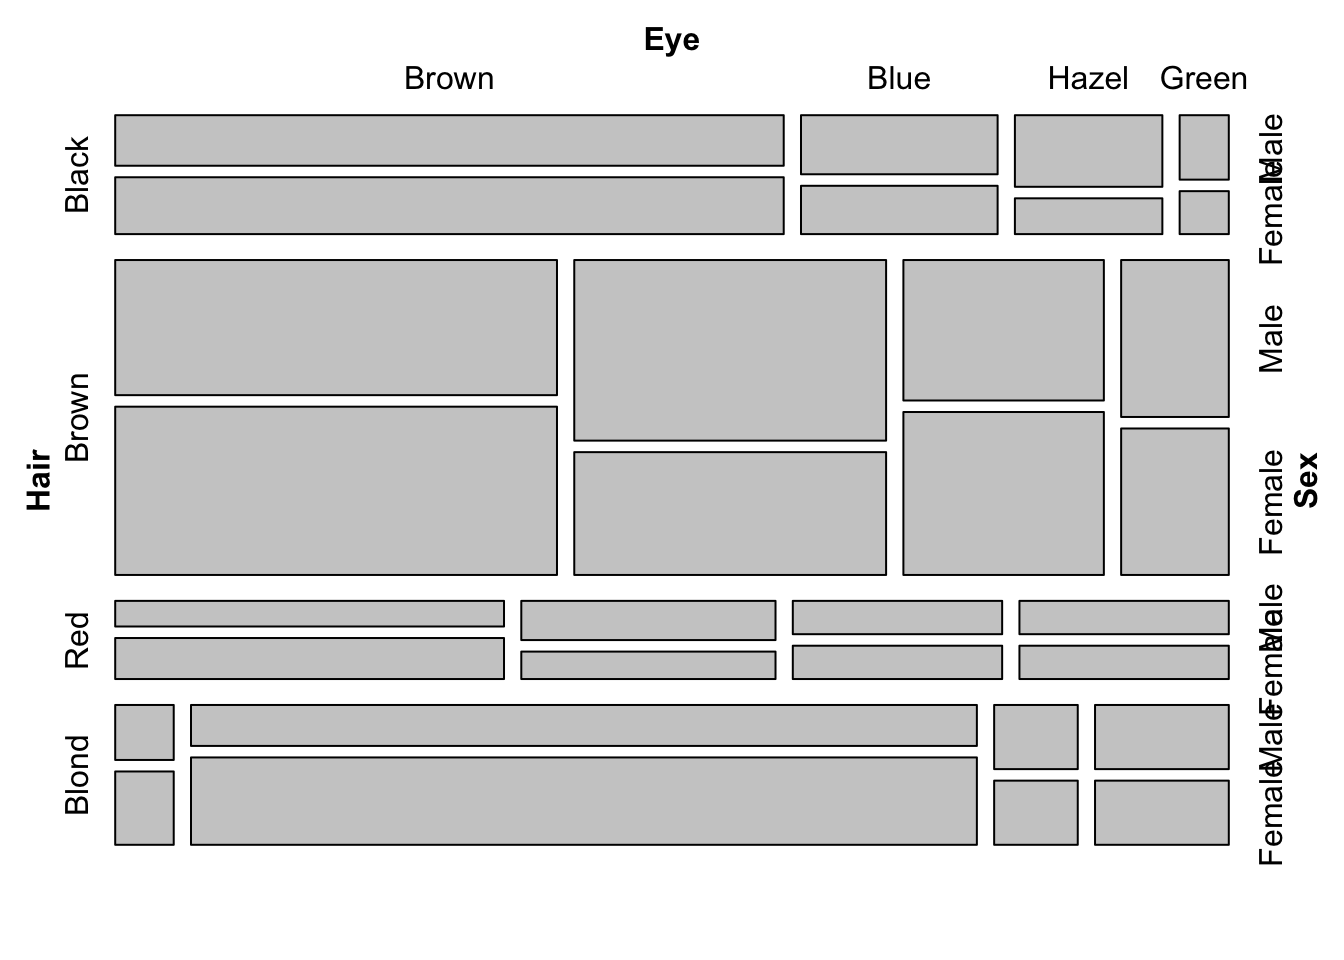 Mosaic plots with three variables (hair colour, eye colour and sex) depicting all possible combinations in the data set. _Left_: Uniform shading. _Right_: Shading according to Pearson's residuals.